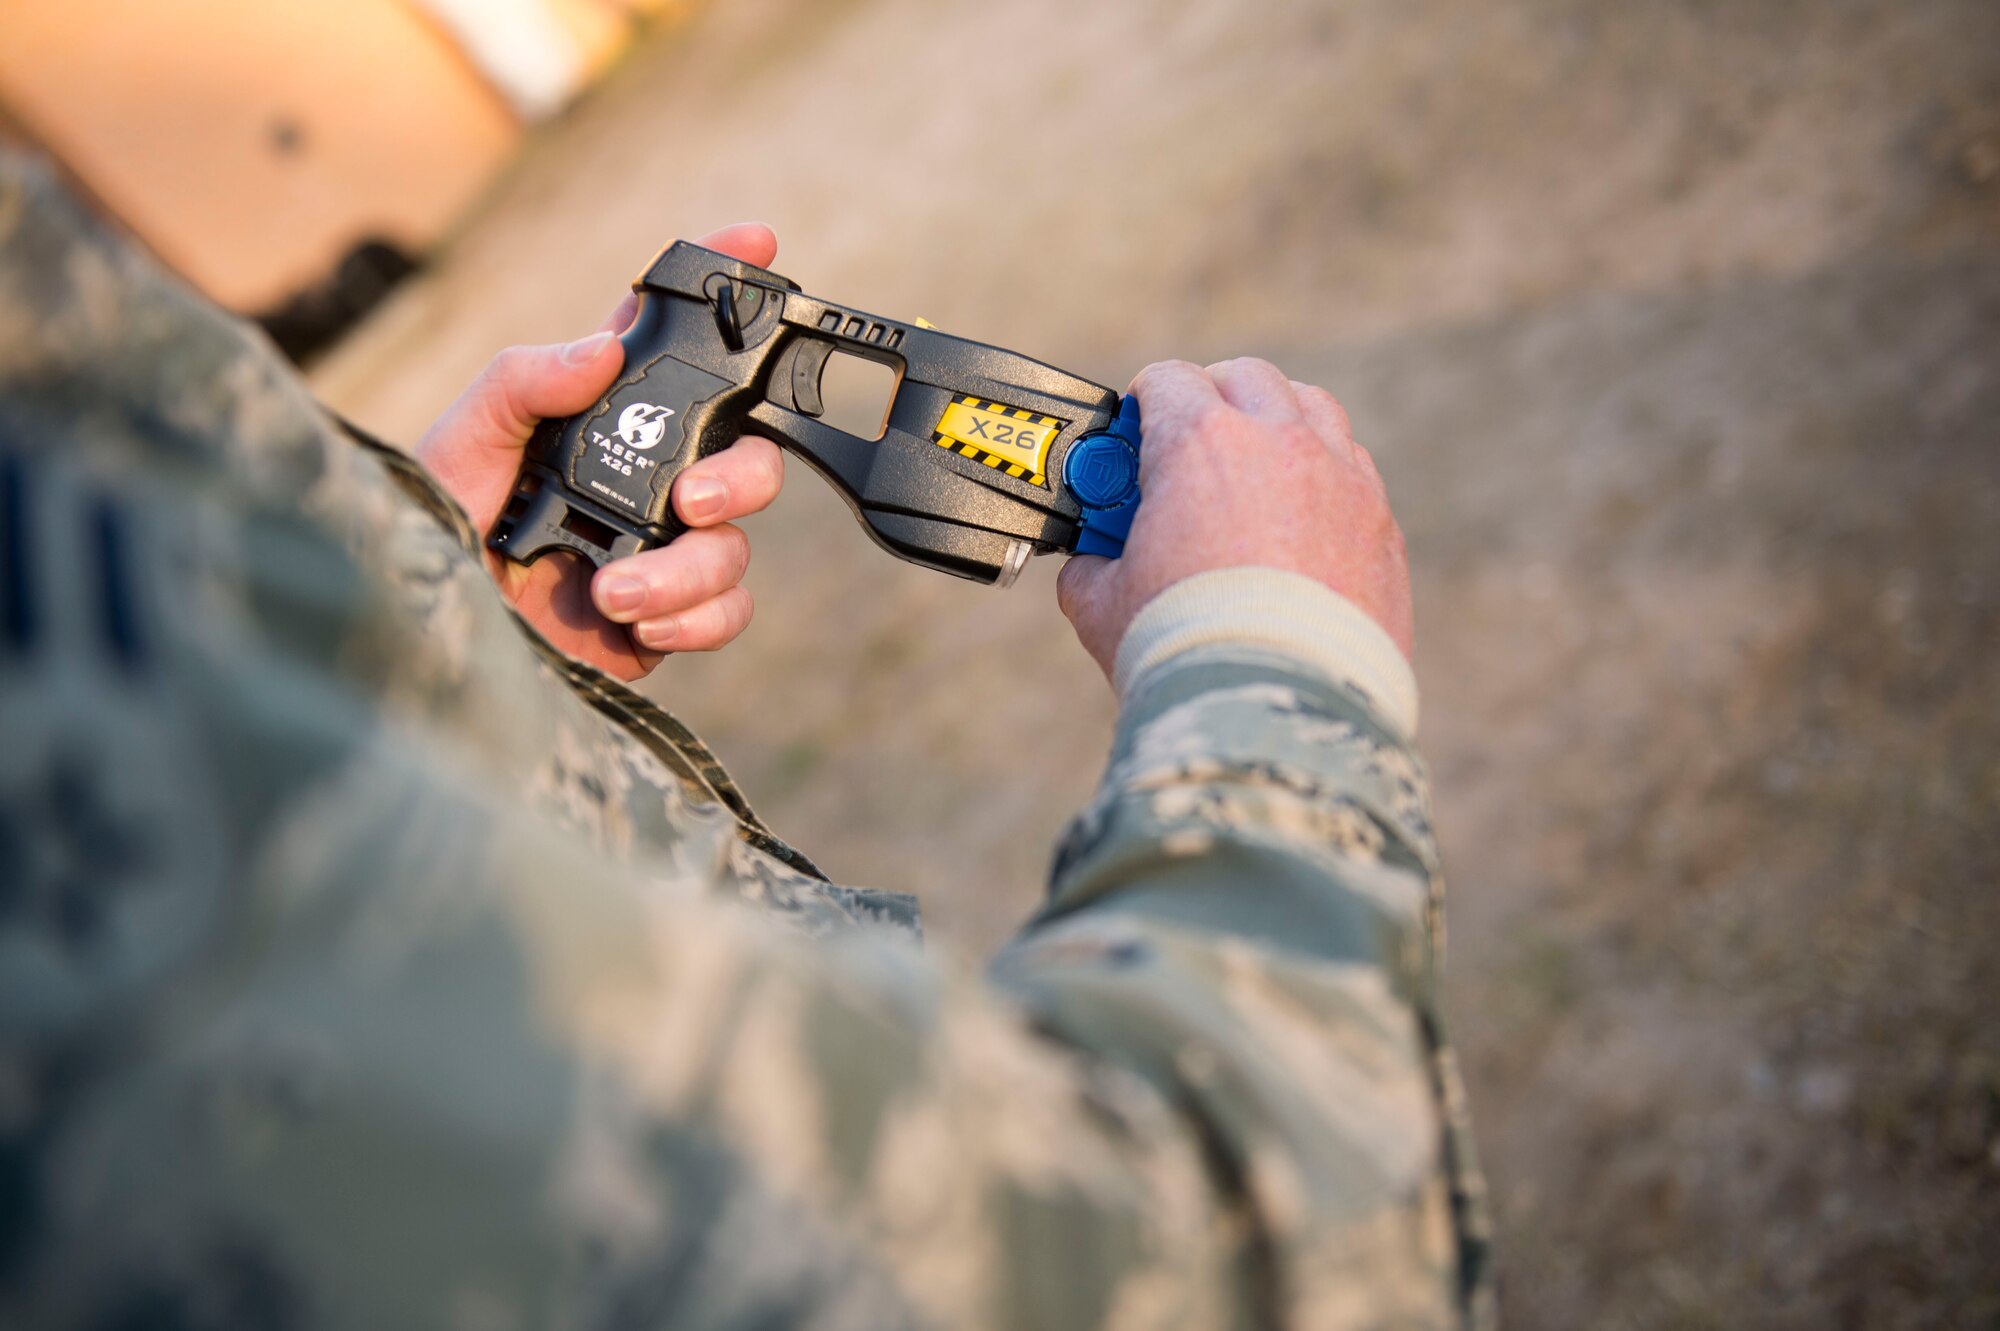 An Airman with the 1st Special Operations Security Forces Squadron loads a taser gun with a training cartridge during taser training at Hurlburt Field, Fla., Feb. 10, 2016.  If a suspect isn’t complying with verbal orders, the use of a taser on a suspect can be a secondary use of force. (U.S. Air Force photo by Senior Airman Krystal M. Garrett)